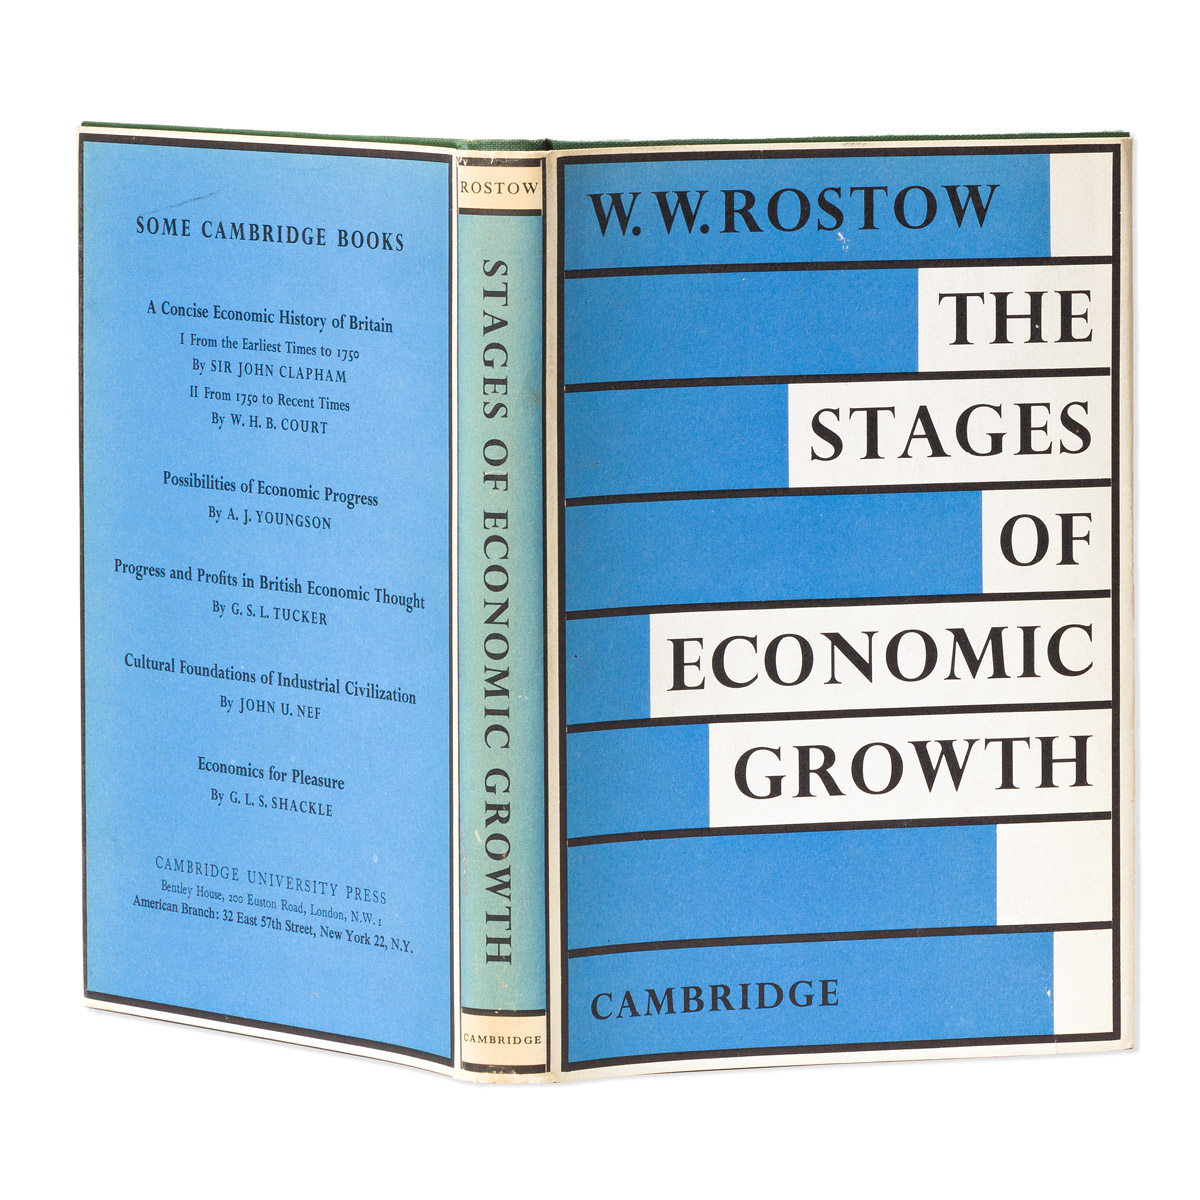 Rostow, Walt Whitman (1916-2003) The Stages of Economic Growth, a Non-Communist Manifesto.